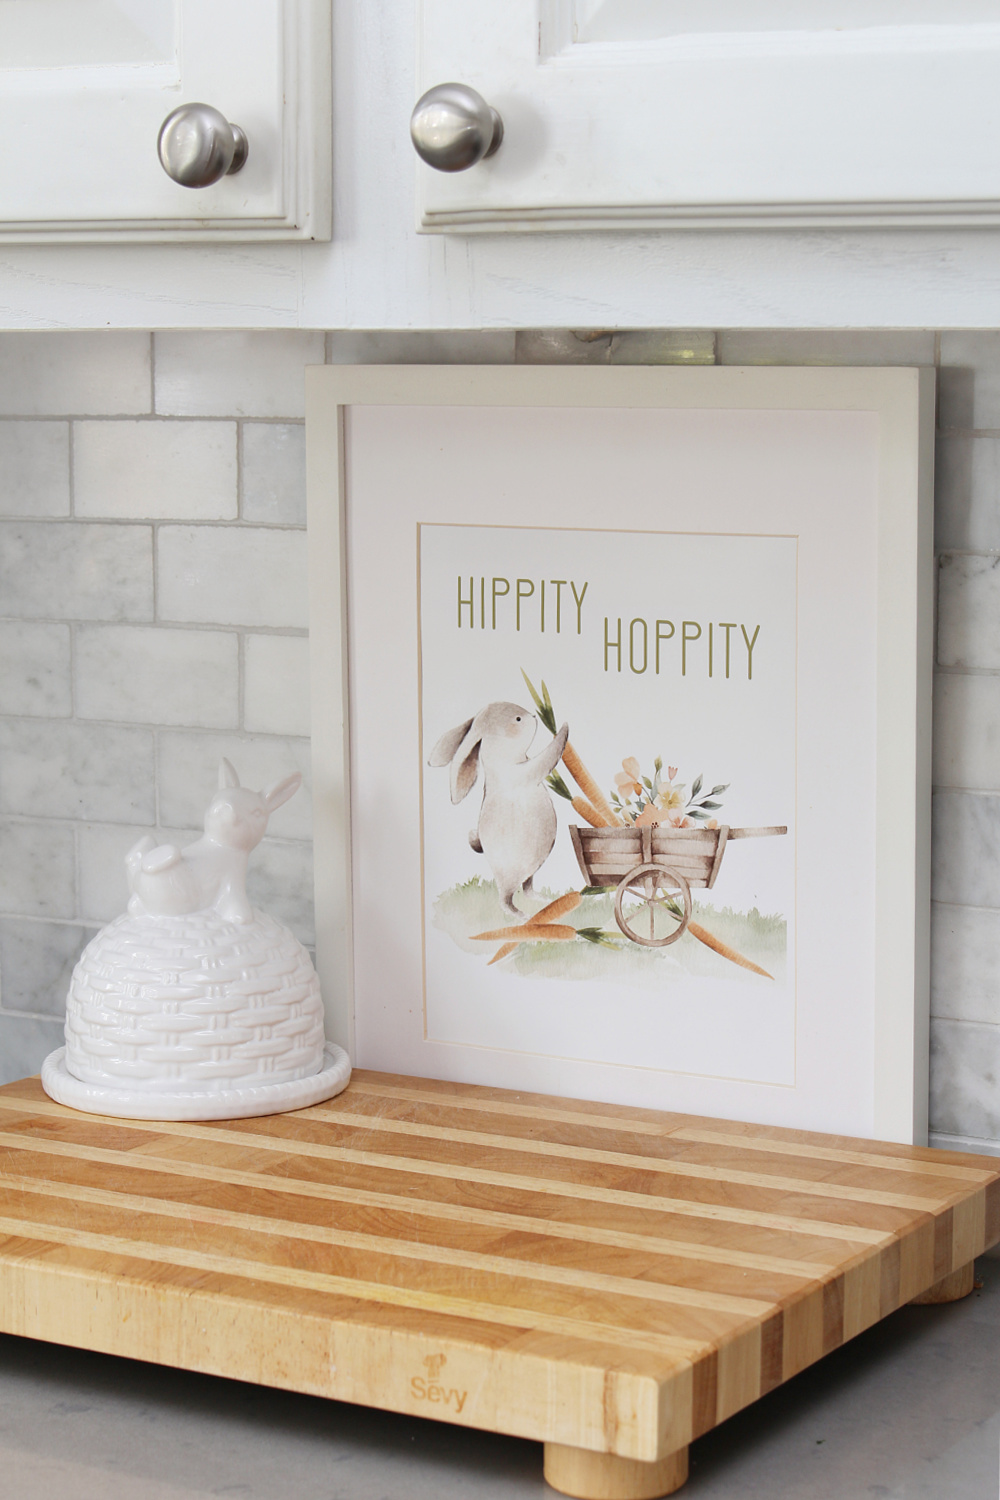 Hippity Hoppity free Easter printable displayed in a kitchen.